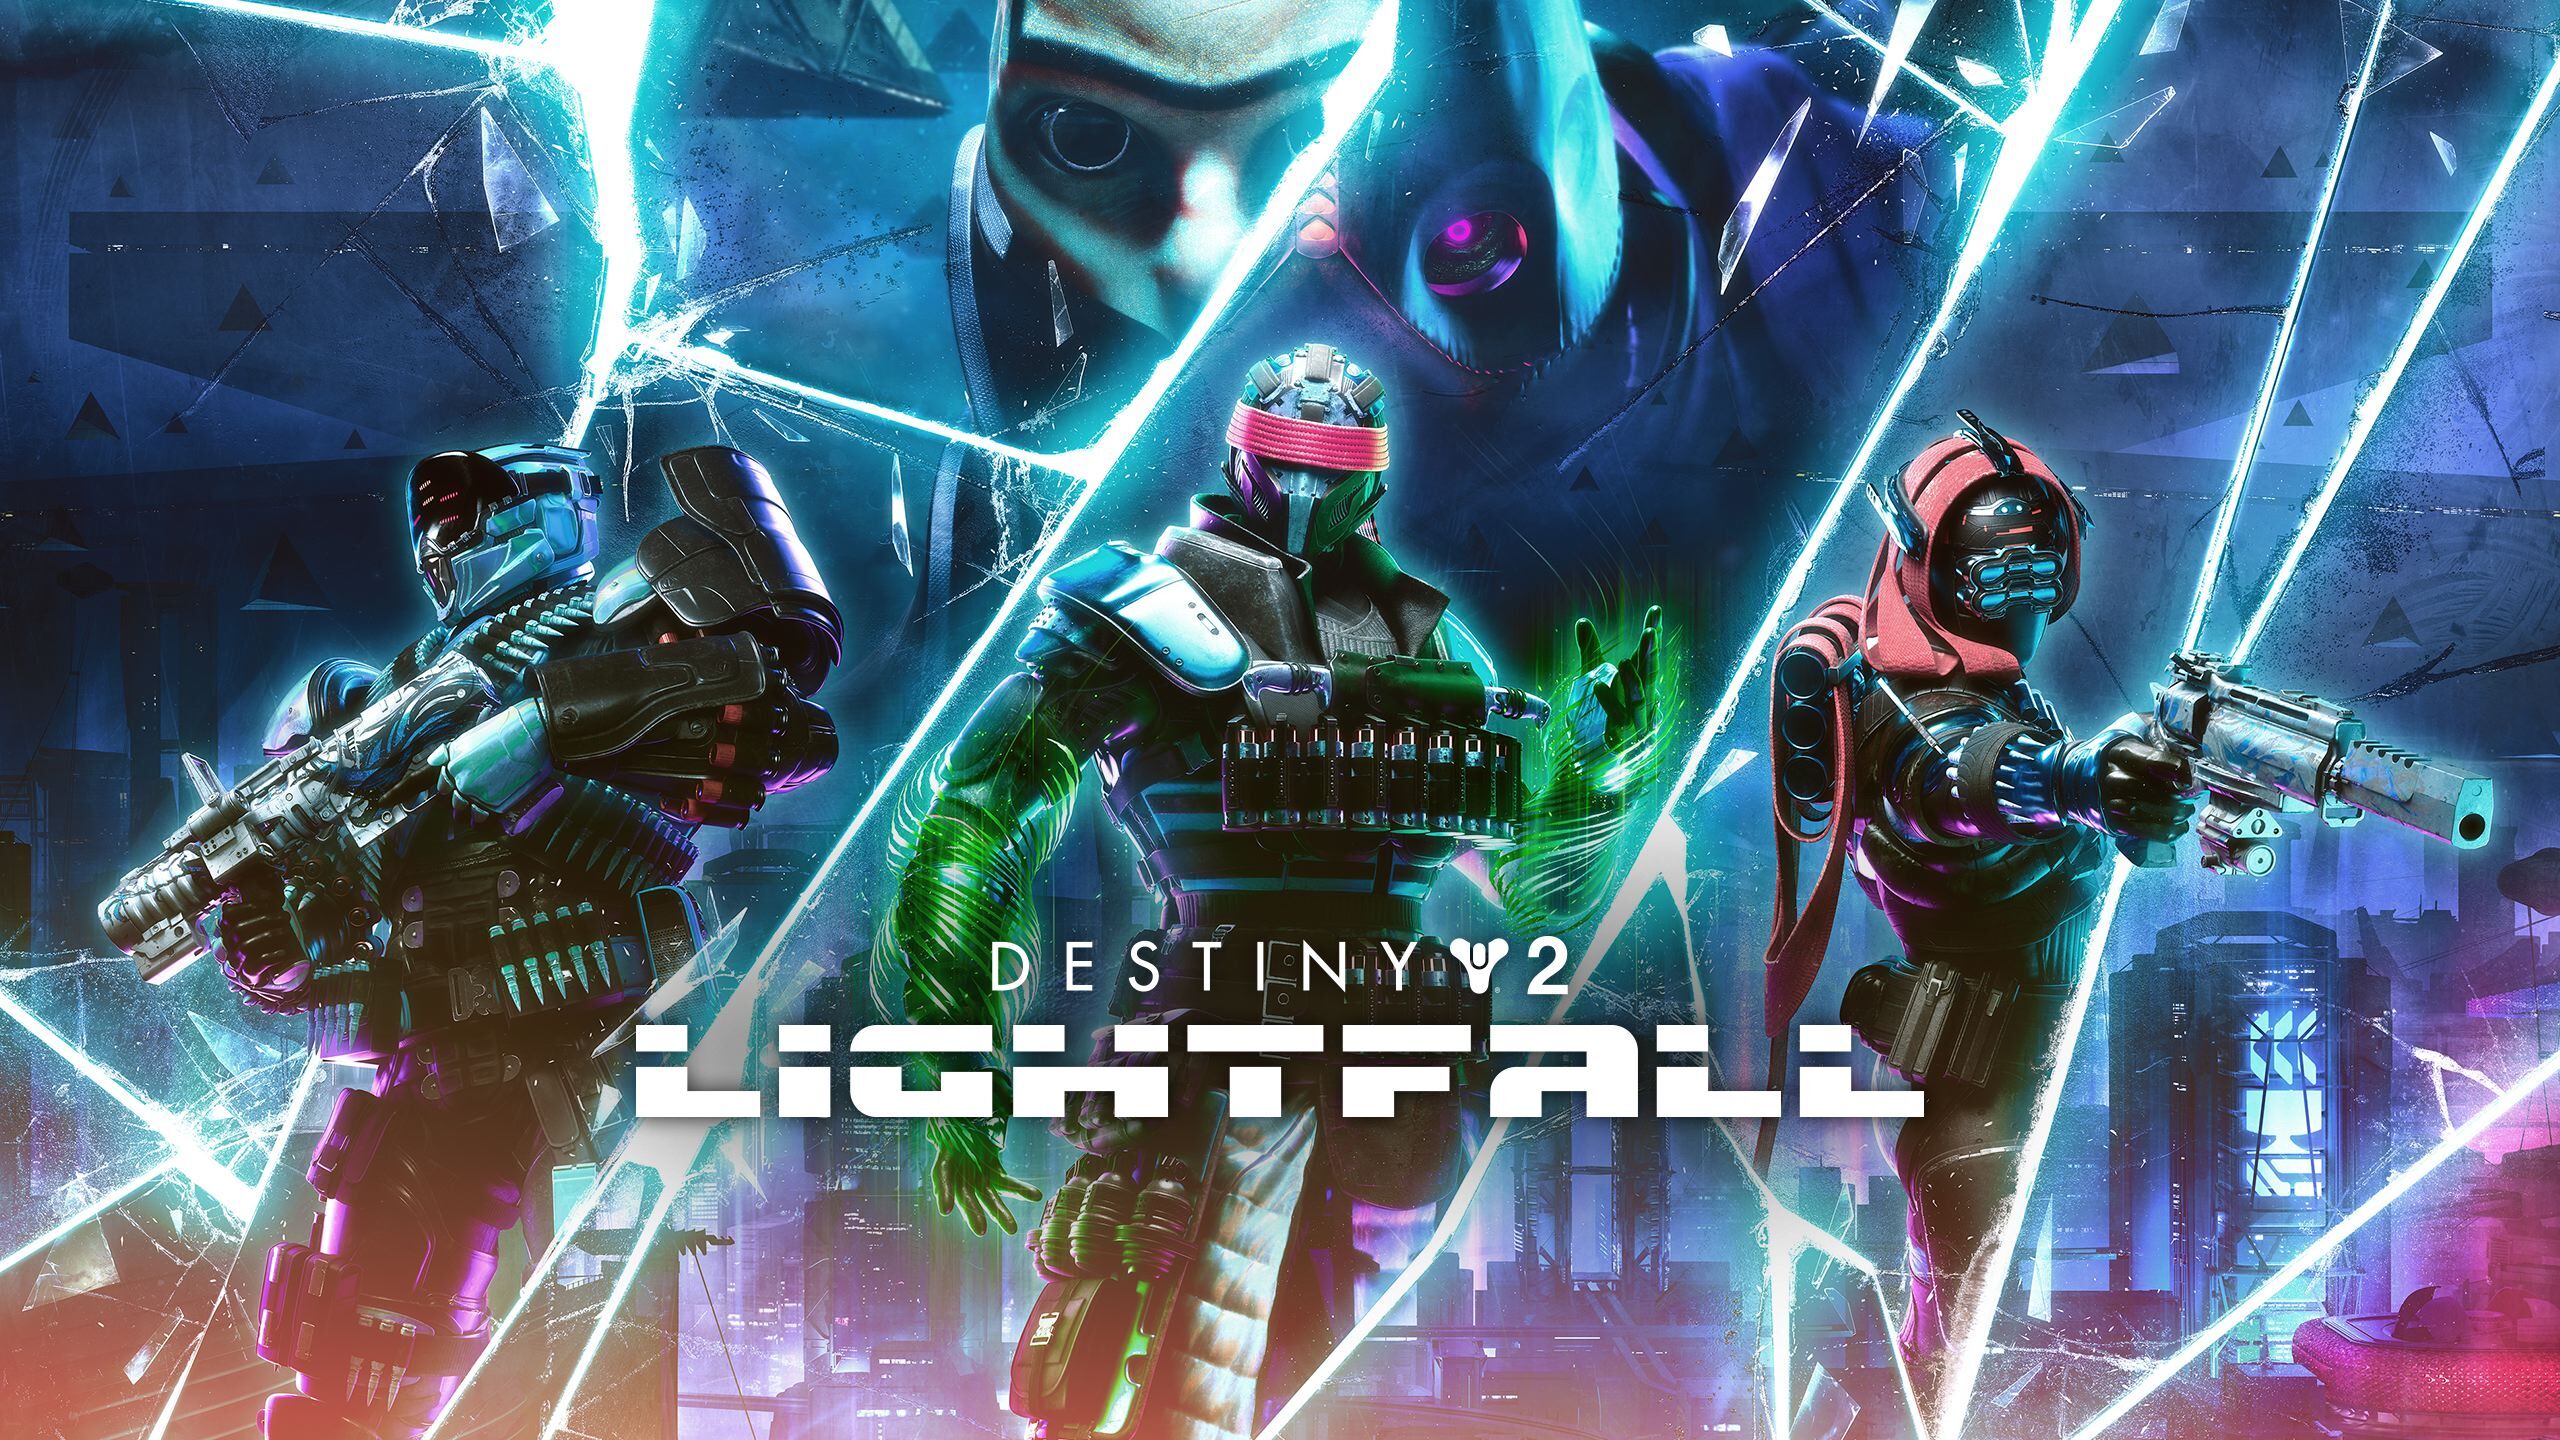 nostalgia - Last game you DIDN'T finish and your thoughts - Page 36 EGS_Destiny2Lightfall_Bungie_AddOn_S1_2560x1440-d8b7472c54040d10d8710f5a269a5437